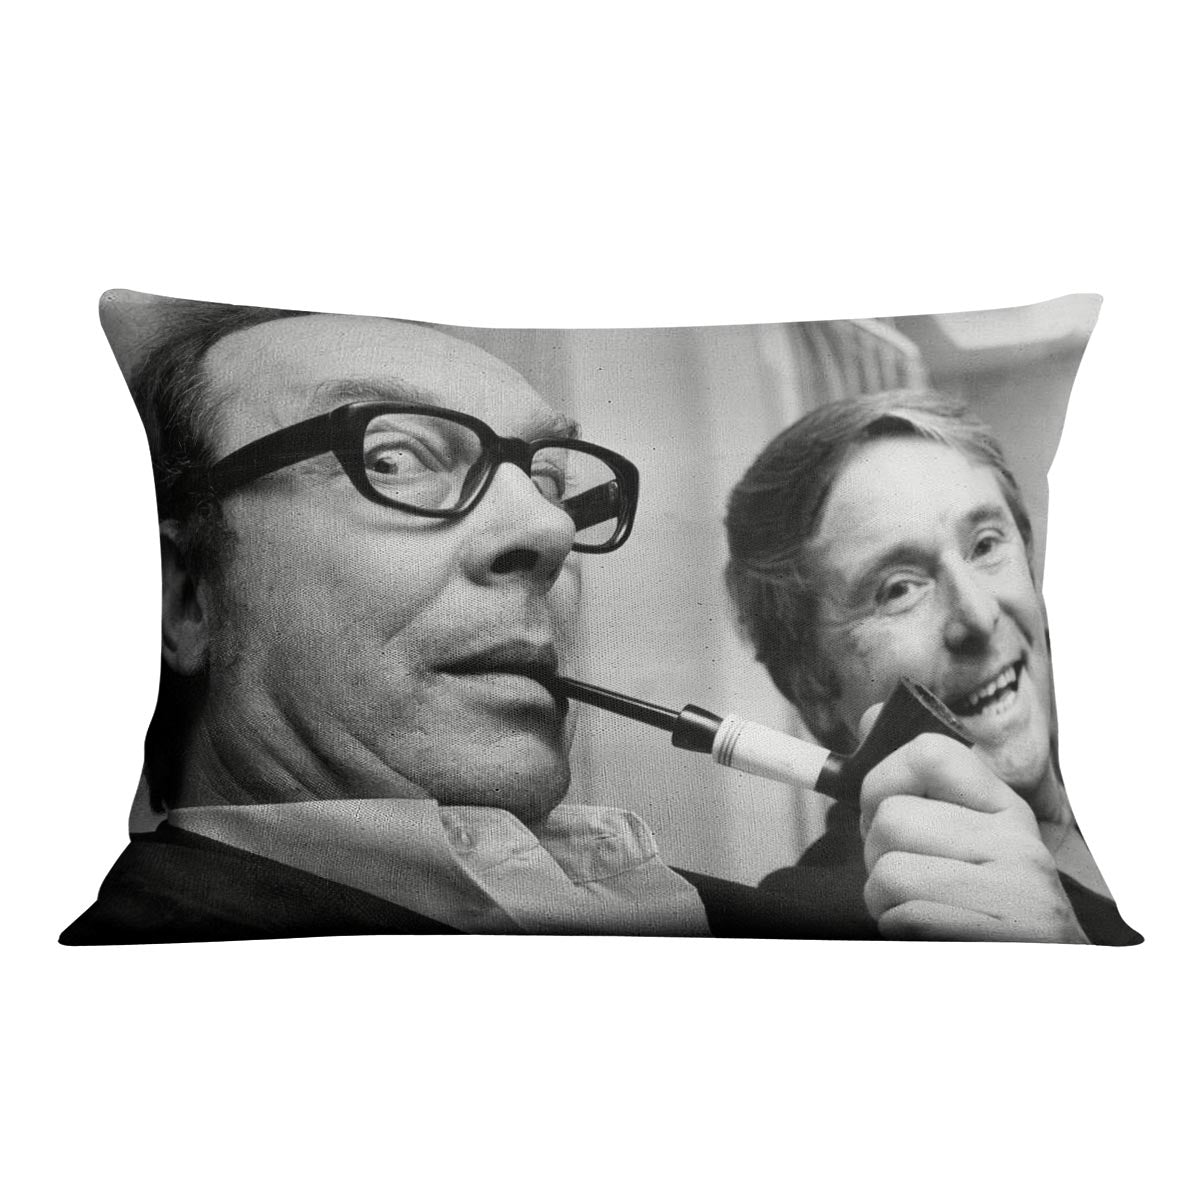 Morecambe and Wise in the 70s Cushion